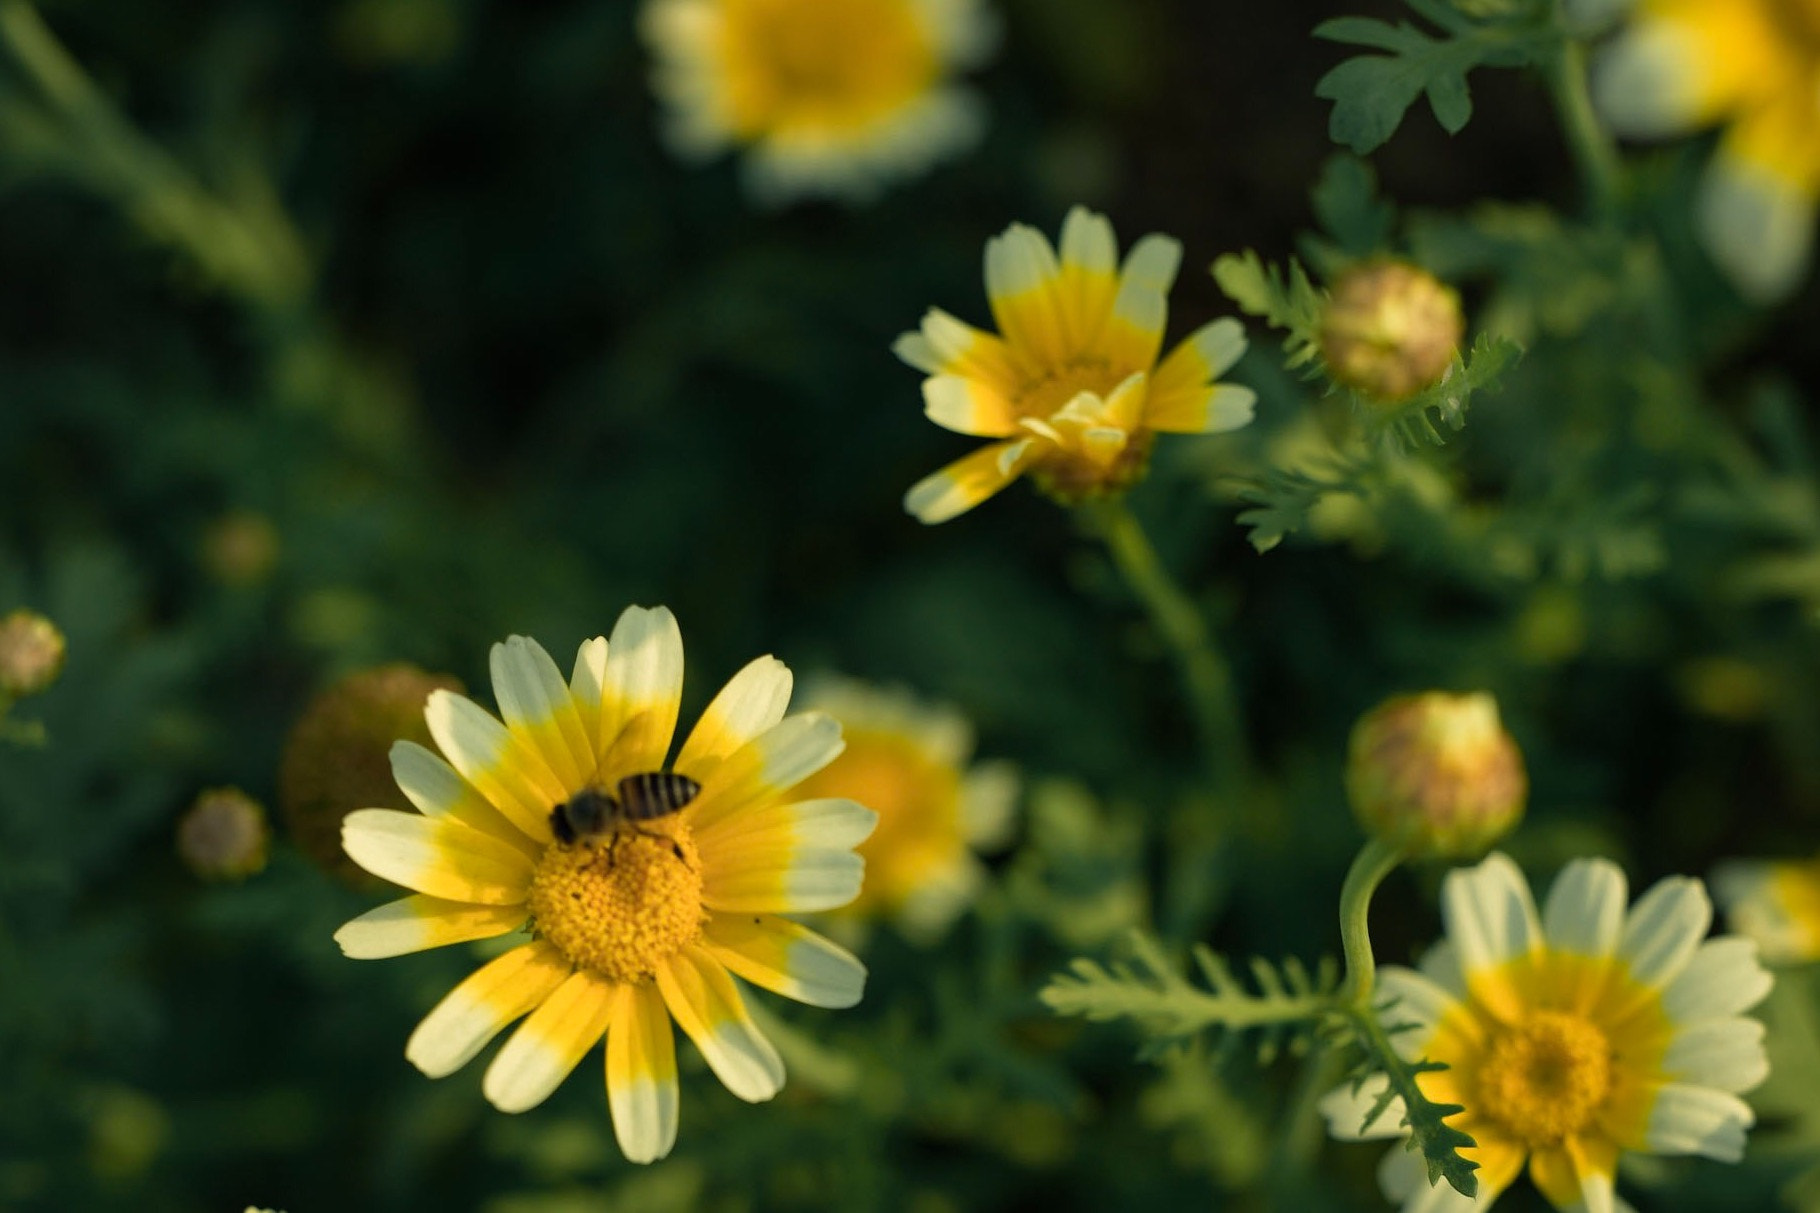 ZEISS Otus 55mm F1.4 sample photo. Bee and flower photography